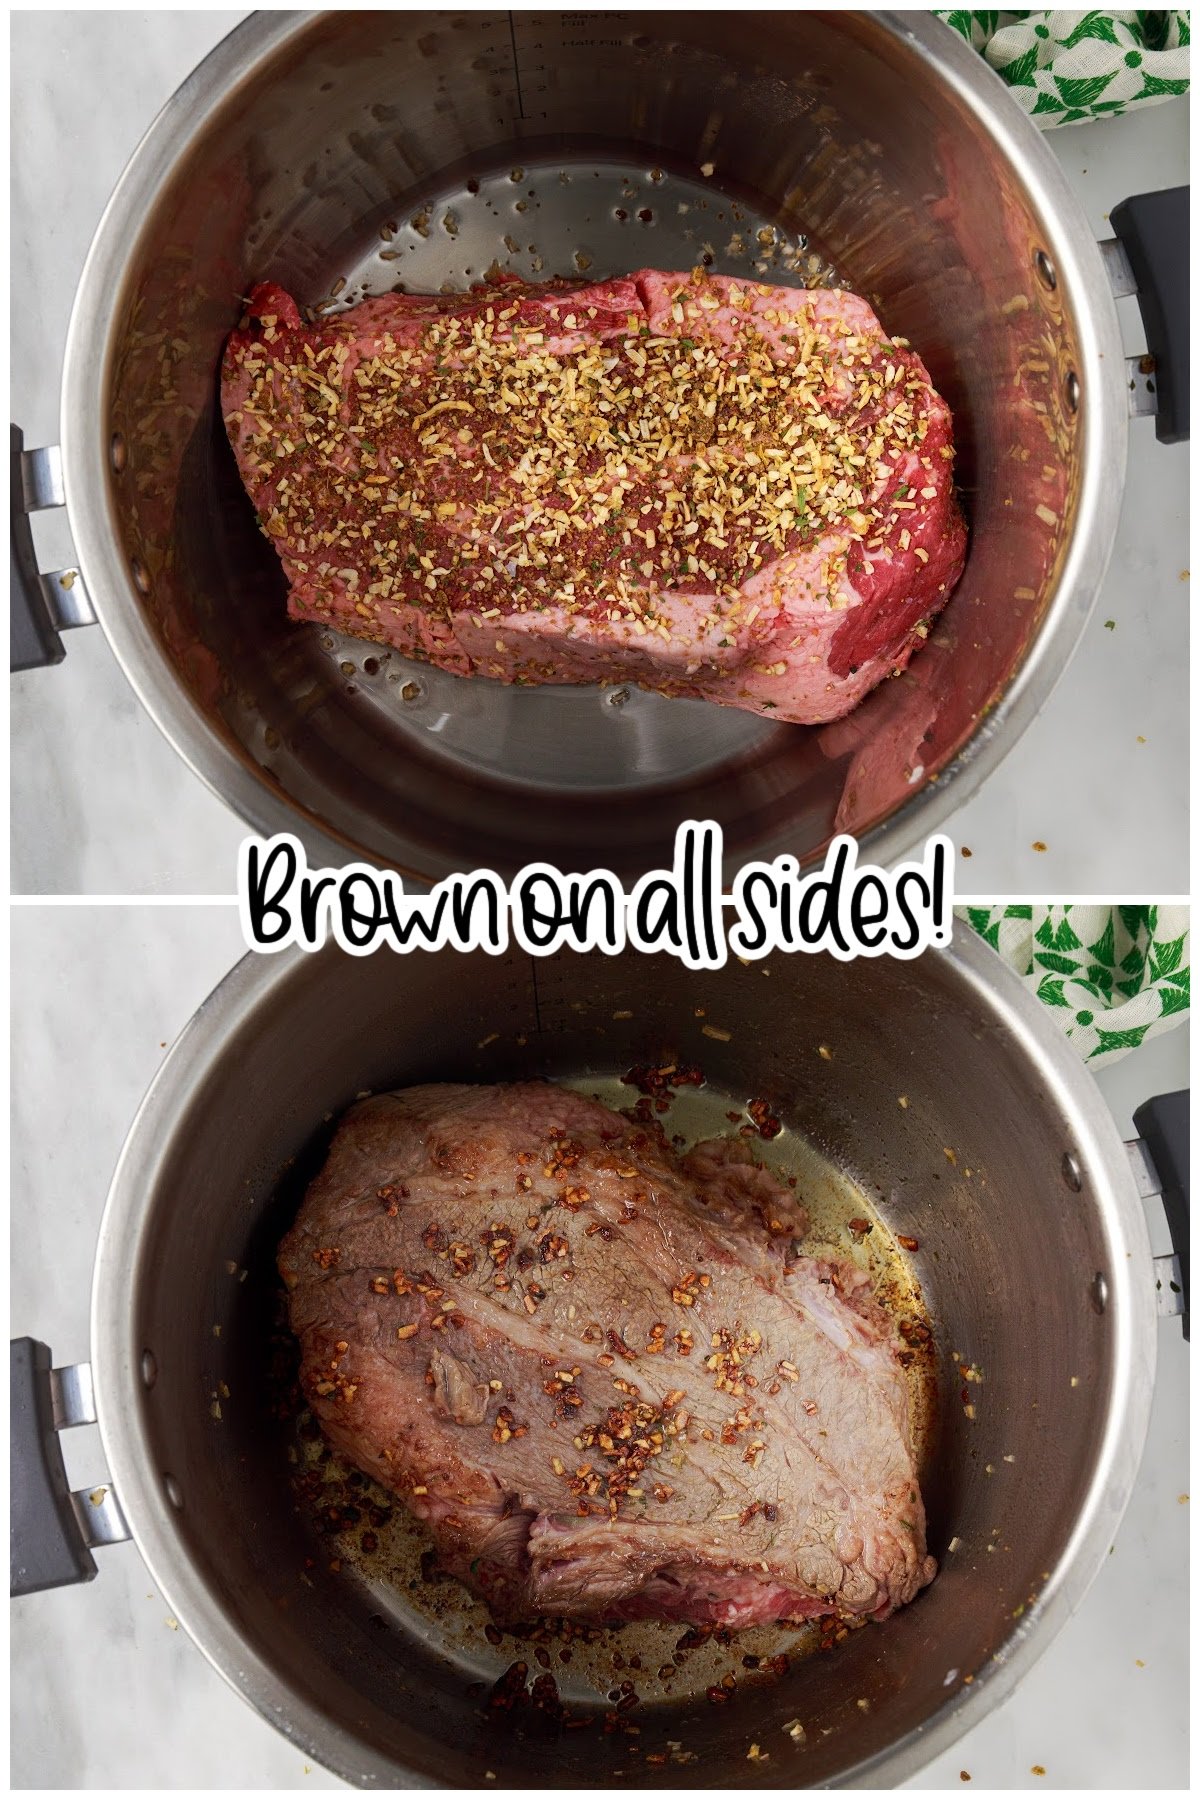 Browning the roast in an instant pot.